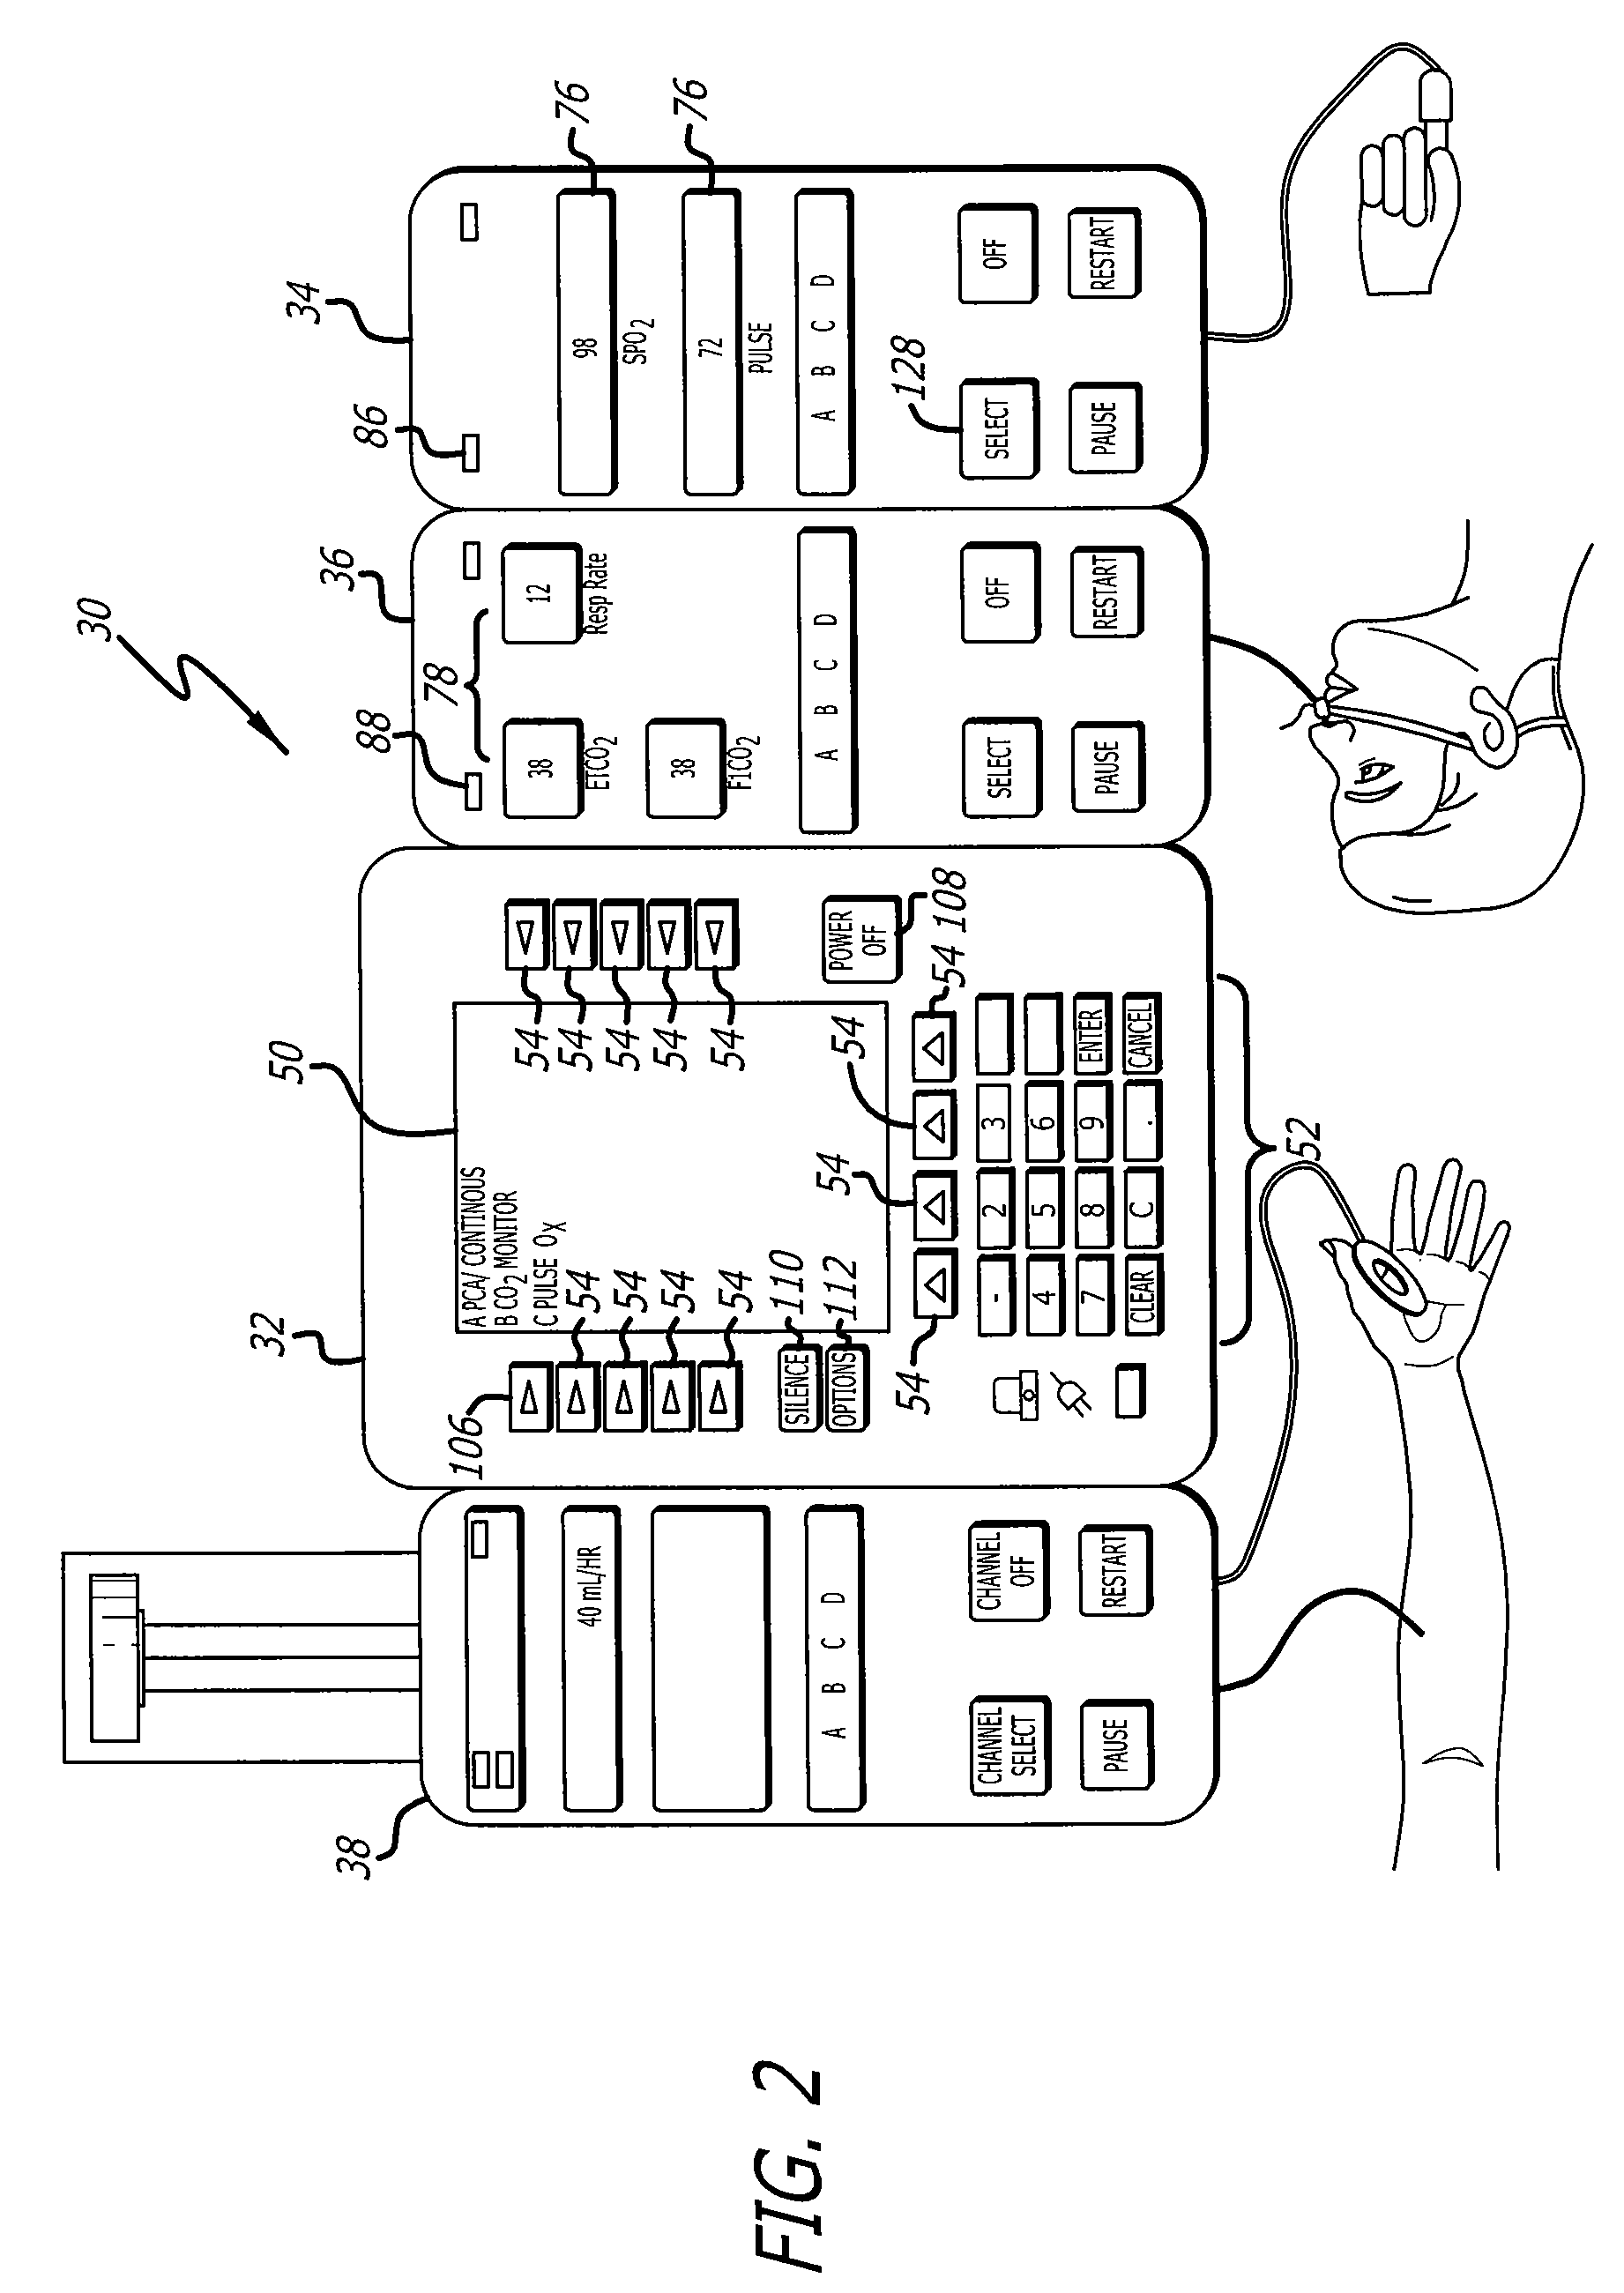 System and method for optimizing control of PCA and PCEA system